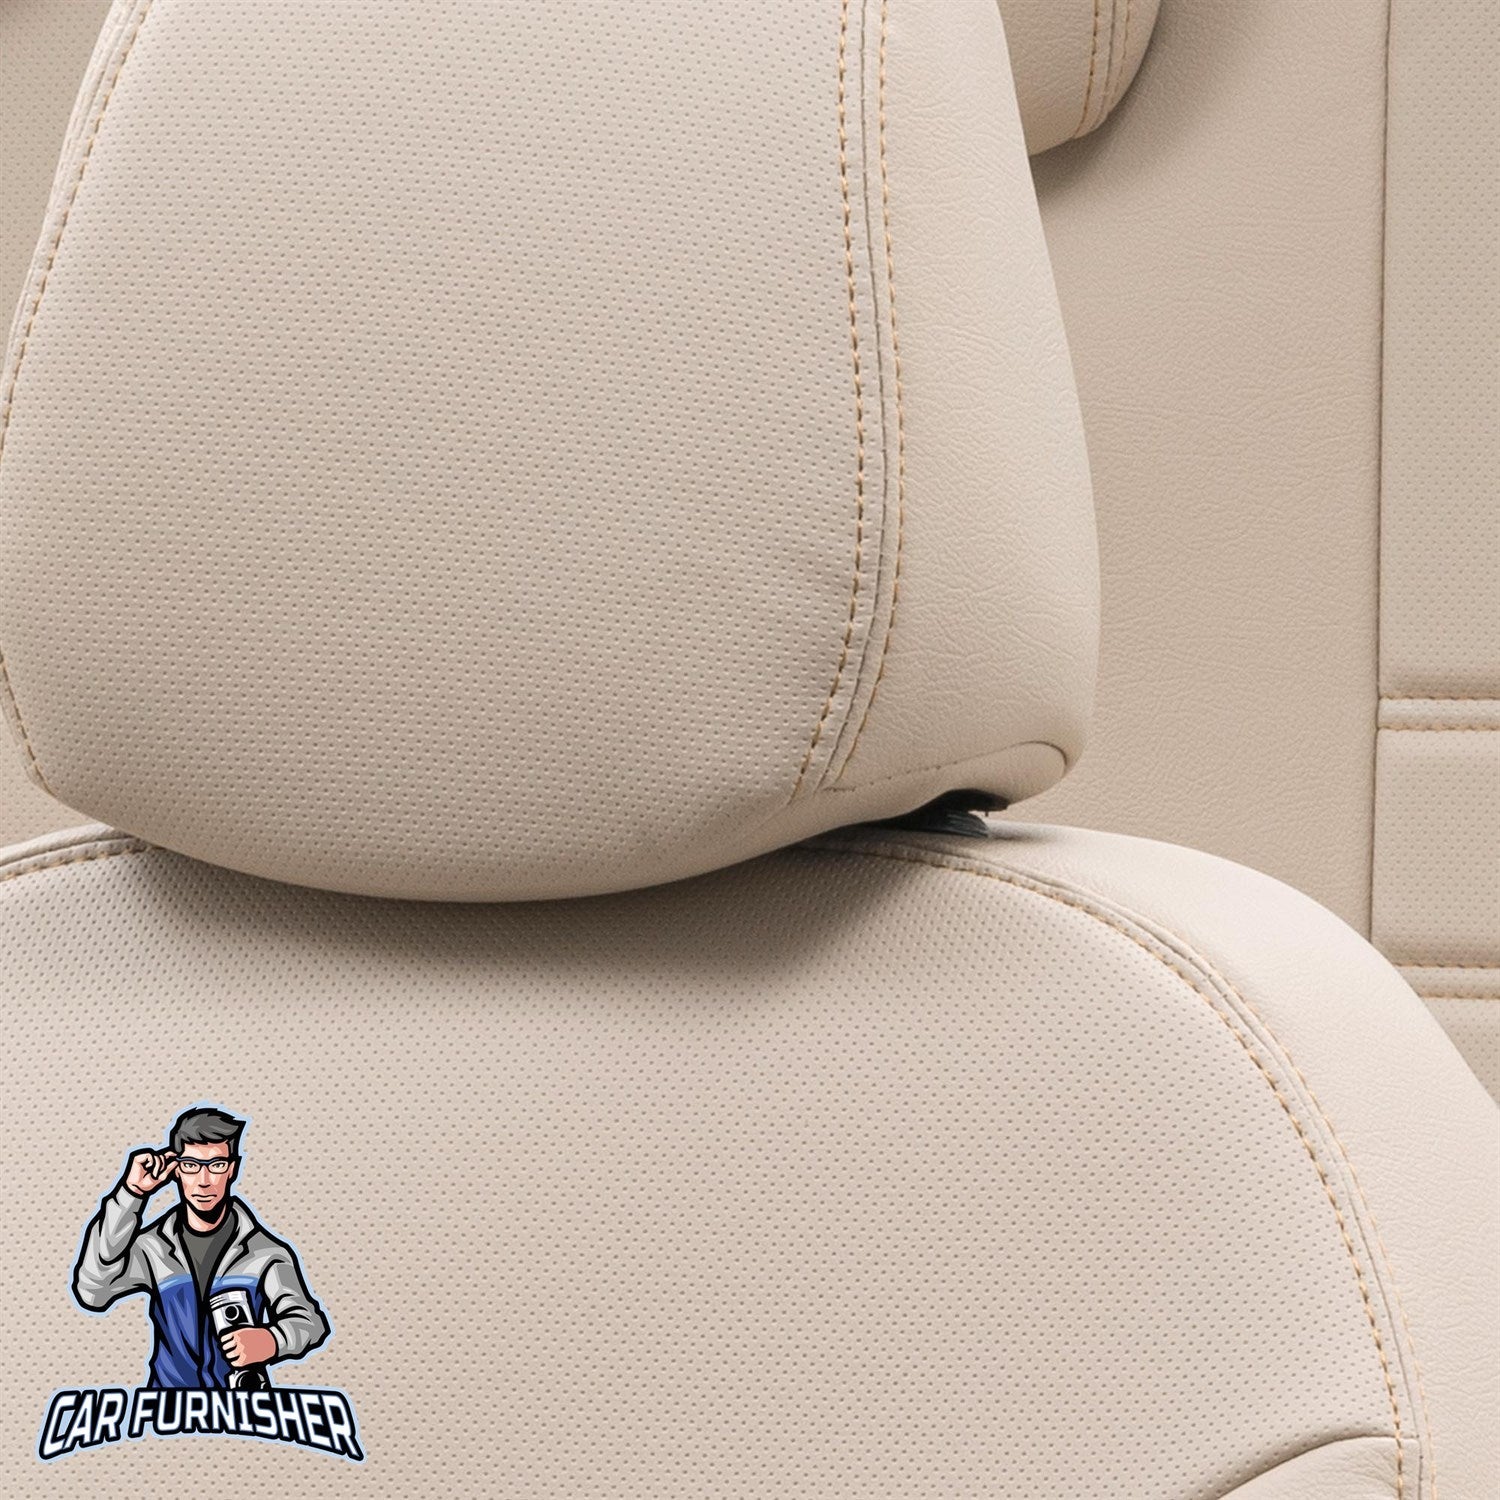 Mercedes Citan Seat Covers Istanbul Leather Design Beige Leather